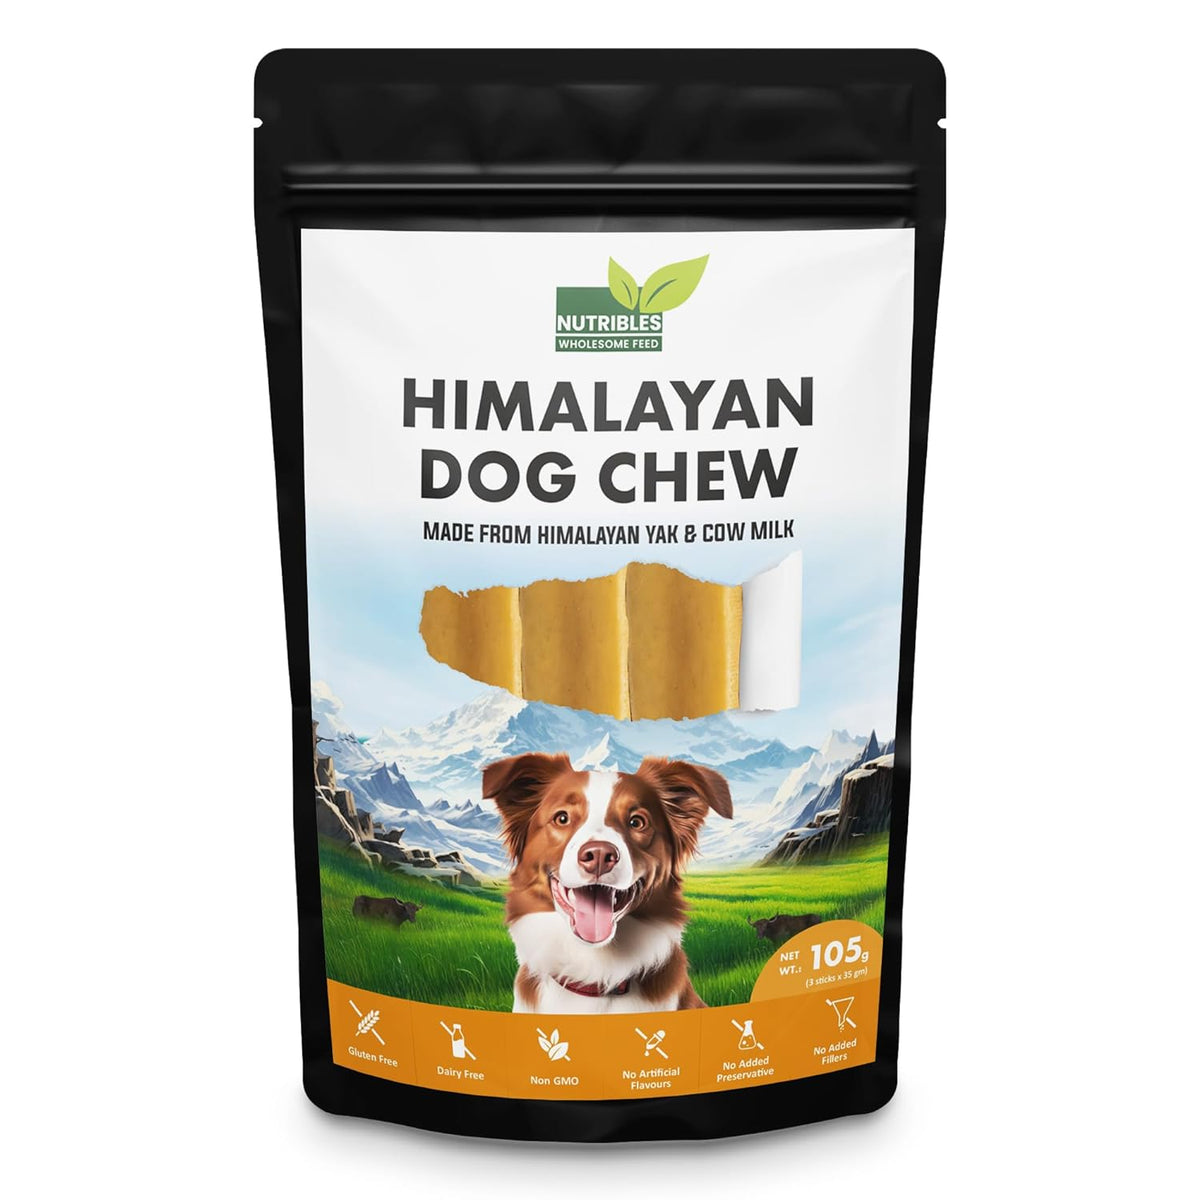 Nutribles Himalayan Dog Chew Sticks | Natural Real Yak & Cow Milk Cheese | Vegetarian Dental Sticks for Healthy Teeth & Gums | Dental Chewsticks for Small Dogs | 105 GMS | Pack of 3